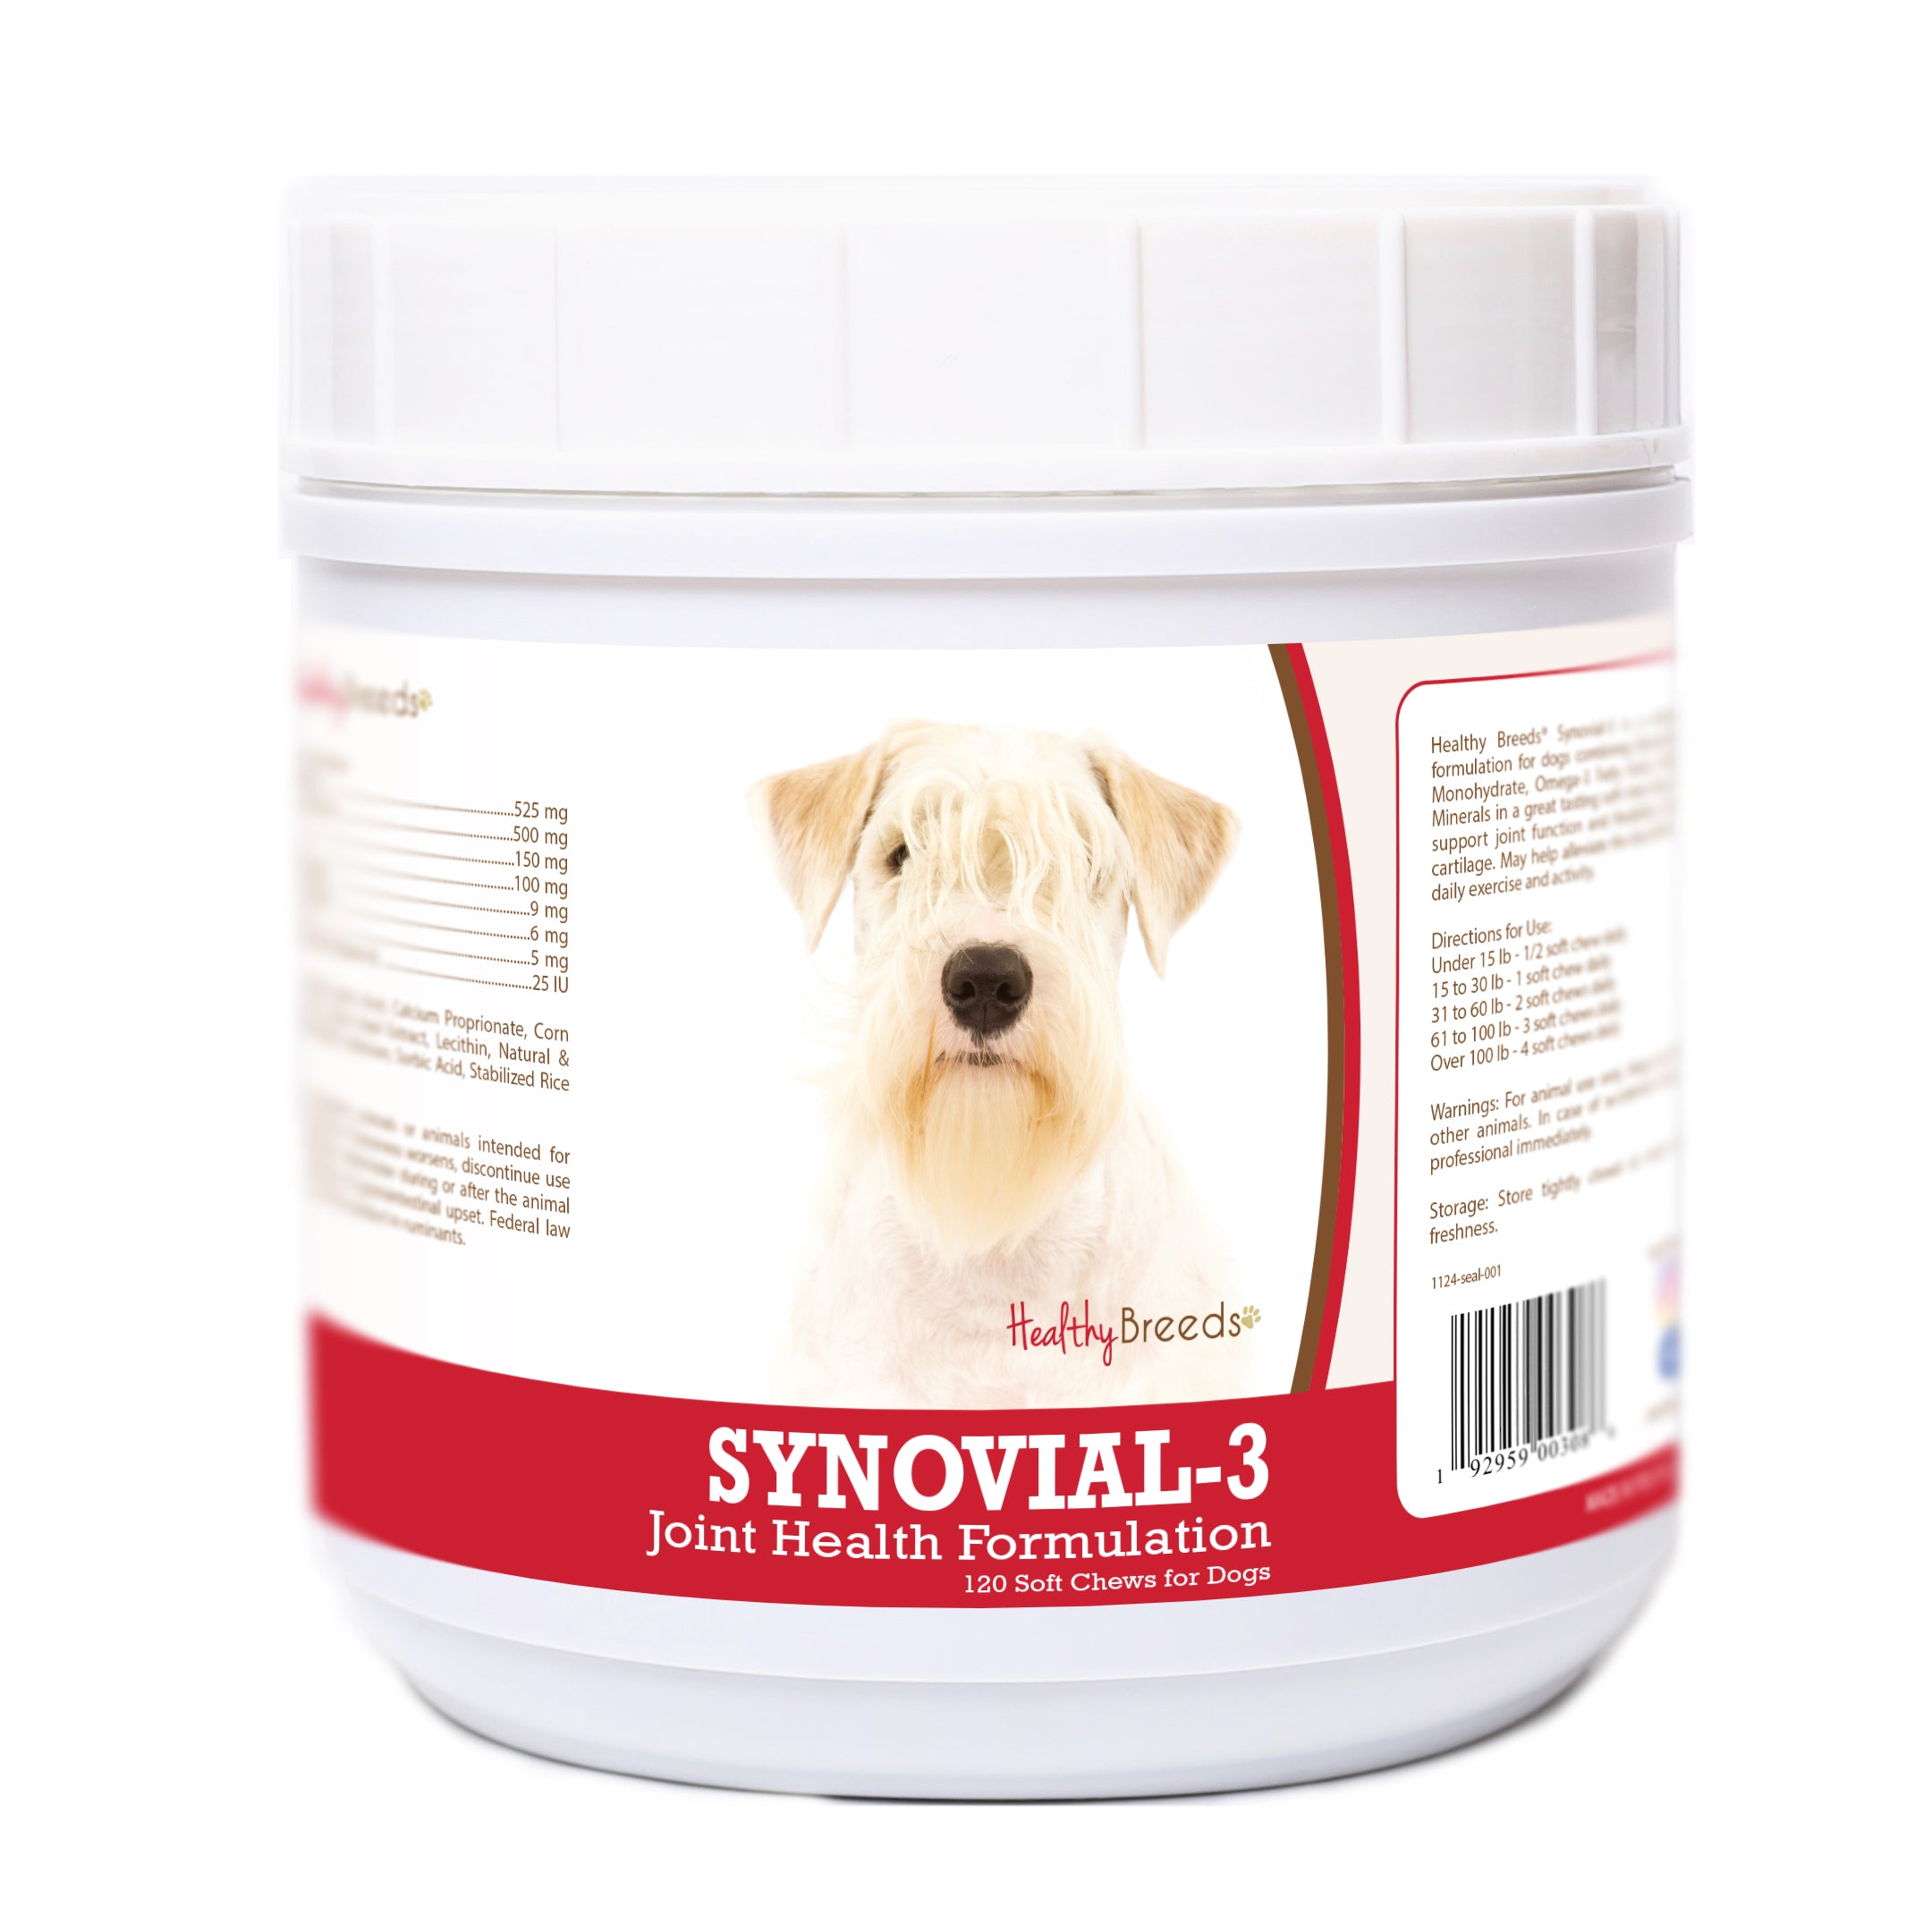 Sealyham Terrier Synovial-3 Joint Health Formulation Soft Chews 120 Count